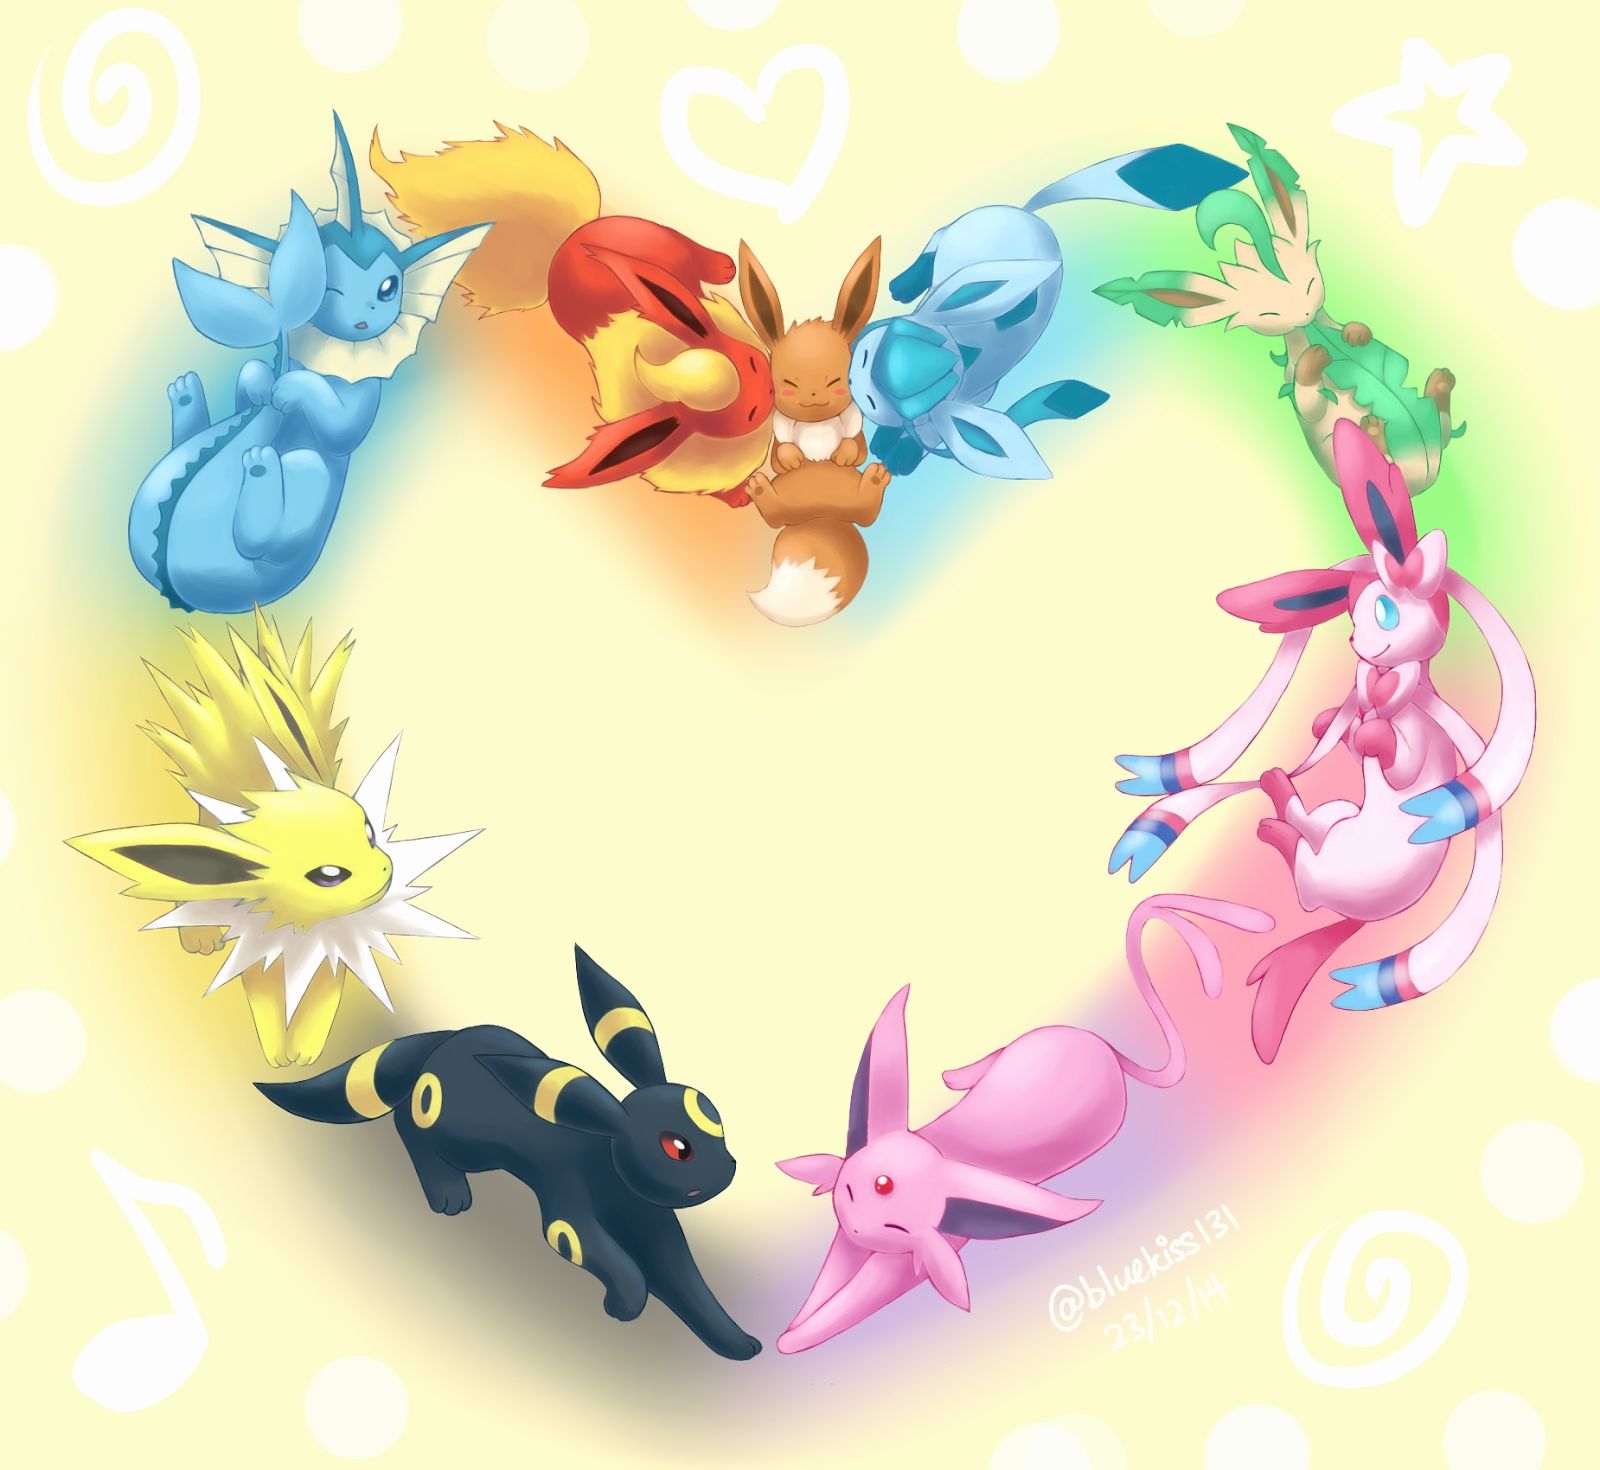 Eeveelutions Wallpaper Lovely Pokémon by Review 133 136 196 197 470 471 700 Eevee Vaporeon Jolteon for You of The Hudson